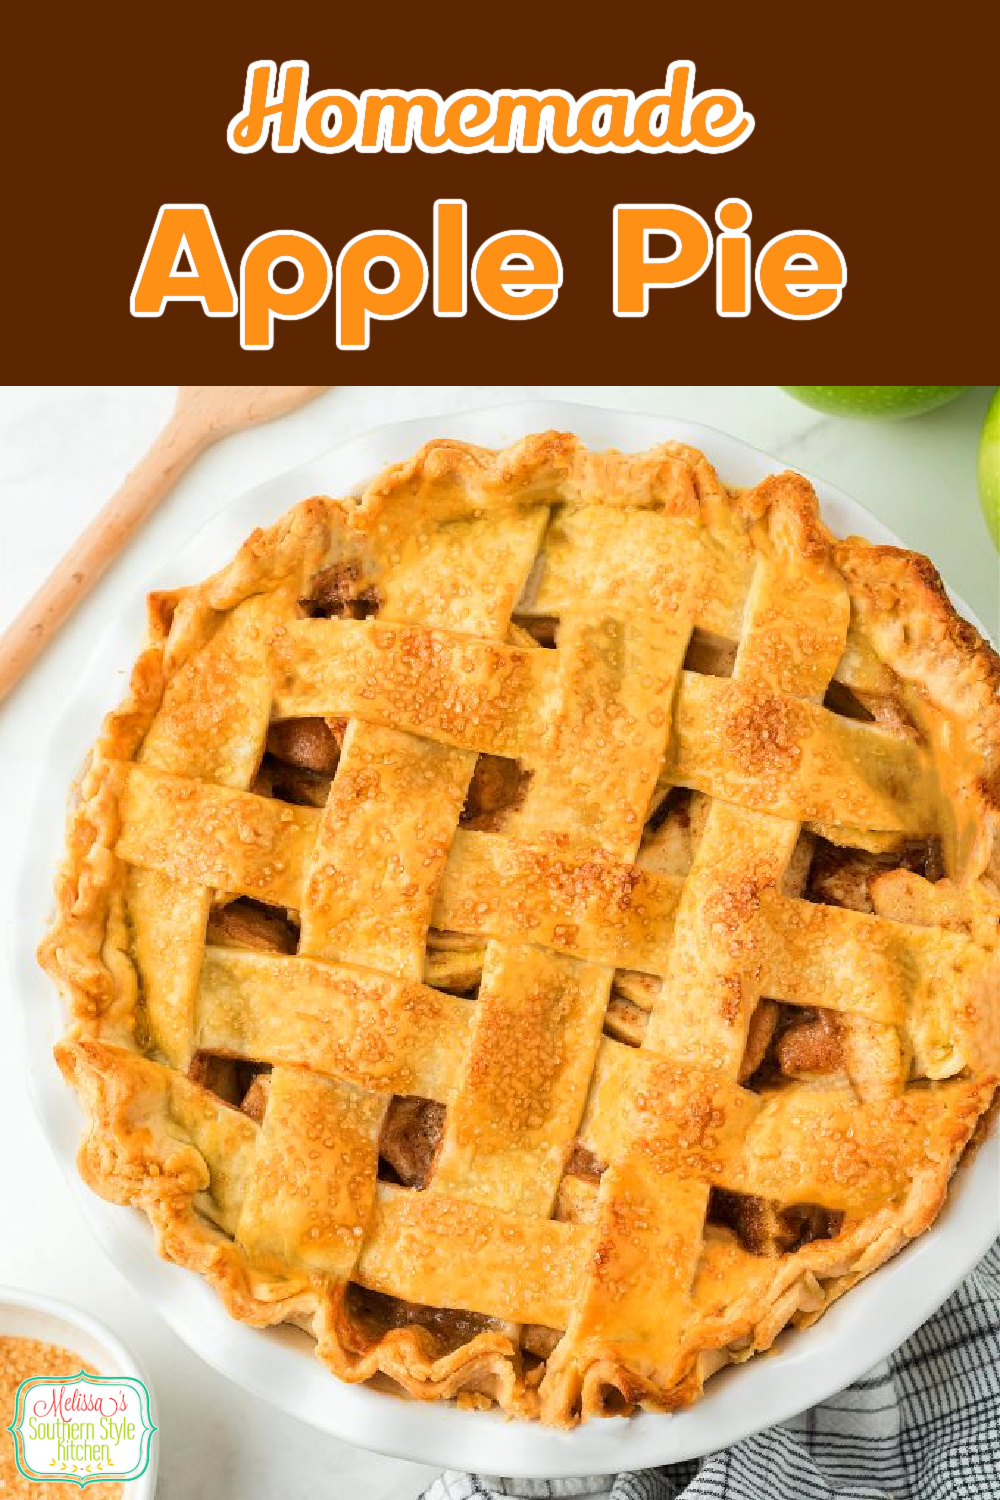 This lattice topped Apple Pie Recipe can be served warm with vanilla ice cream, at room temperature or chilled with a dollop of whipped cream #applepierecipe #applepie #grannysmithapples #bestapplepie #thanksgivingpies #desserts #easyapplepie